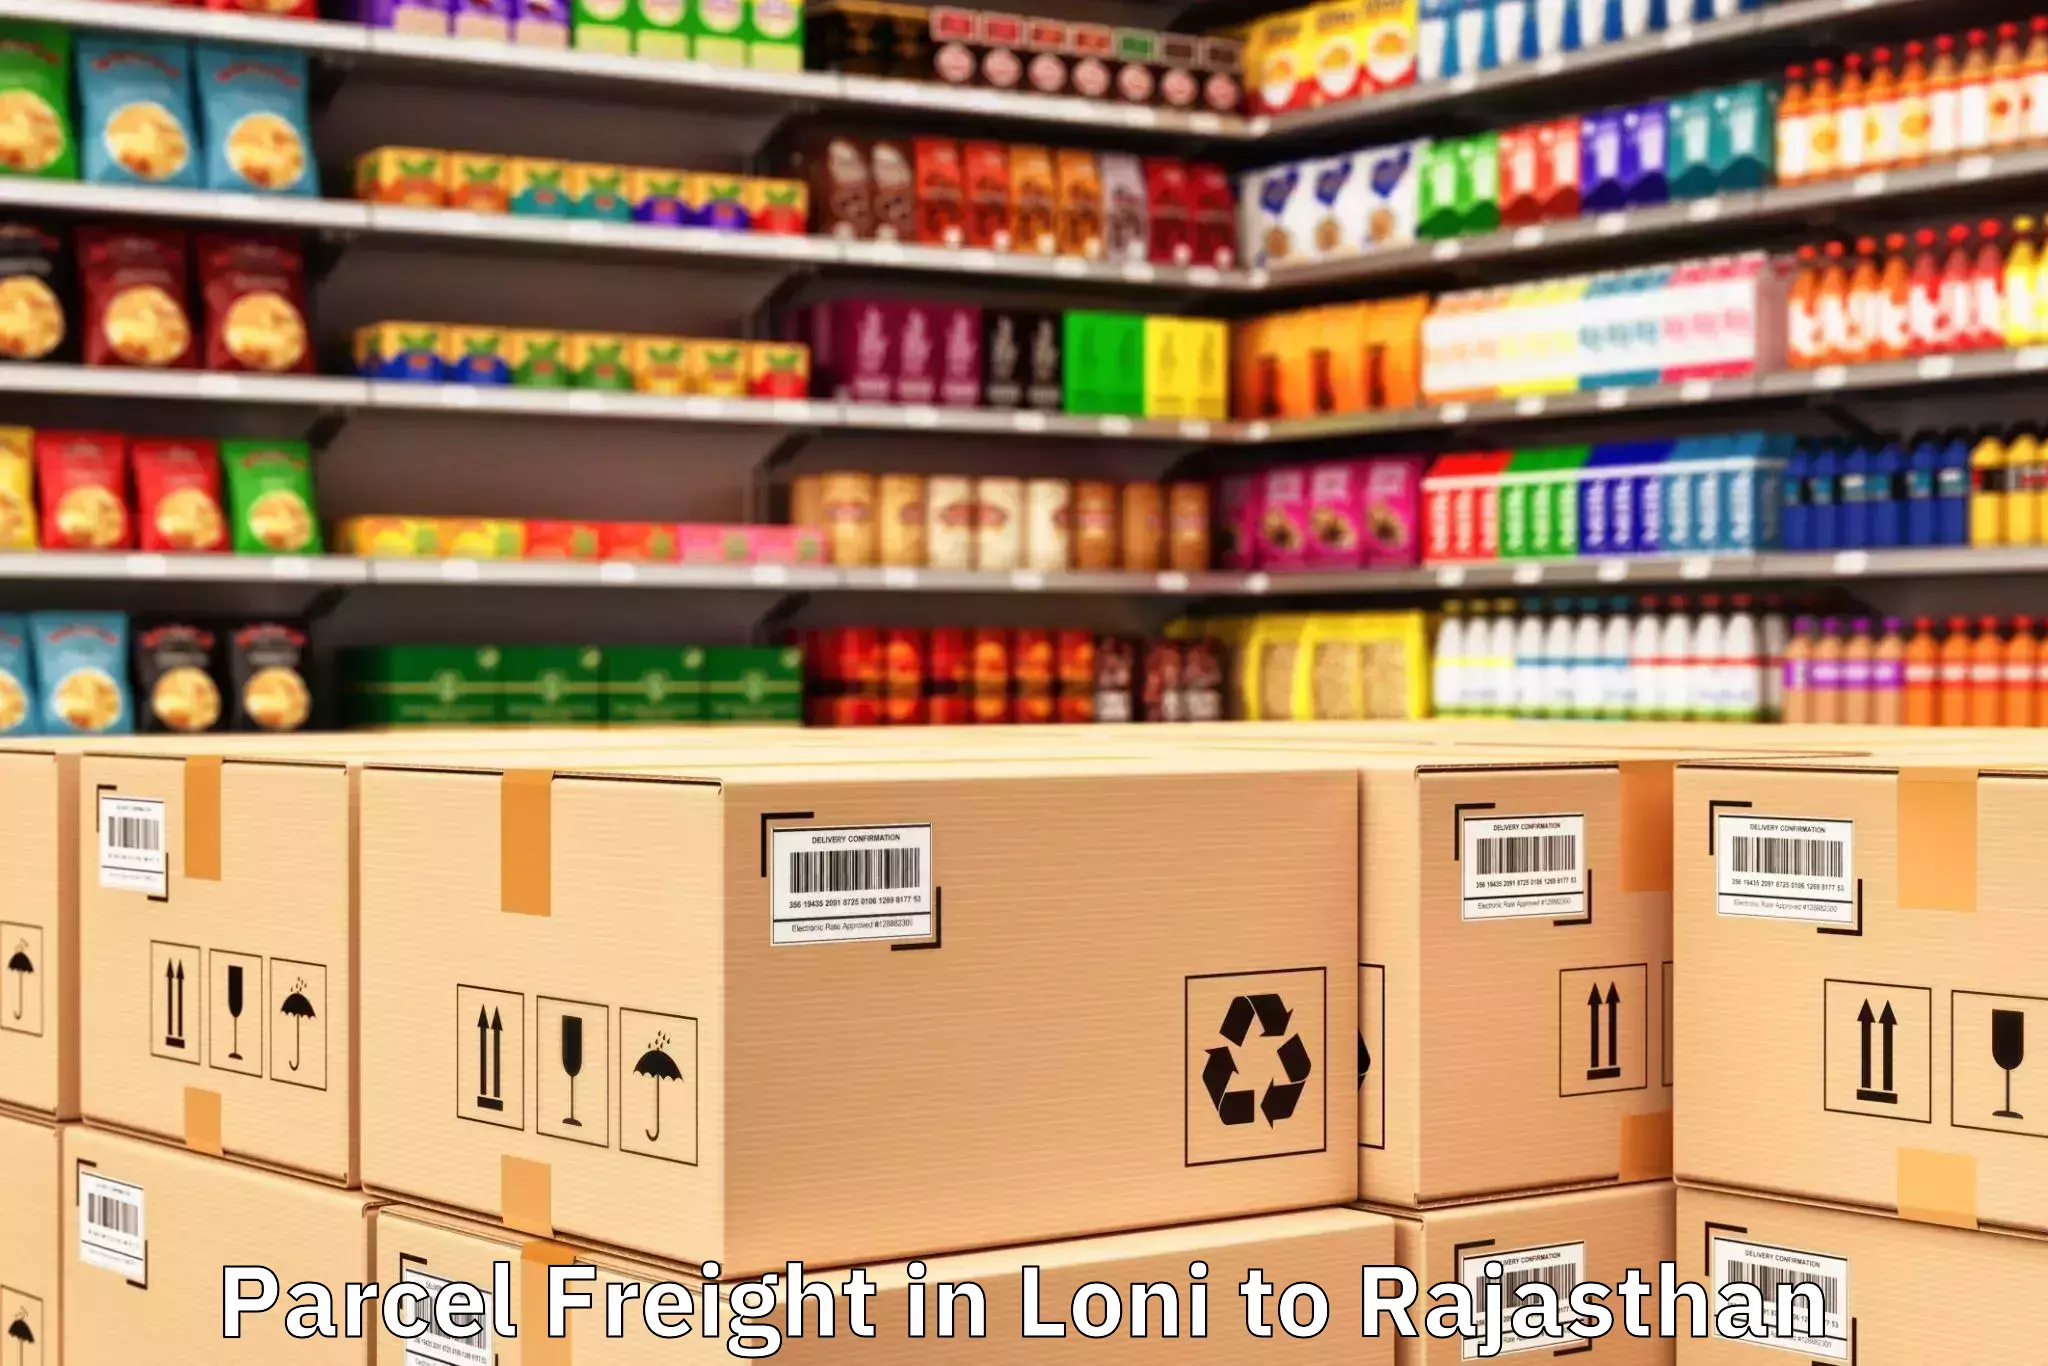 Efficient Loni to Rajasthan Parcel Freight